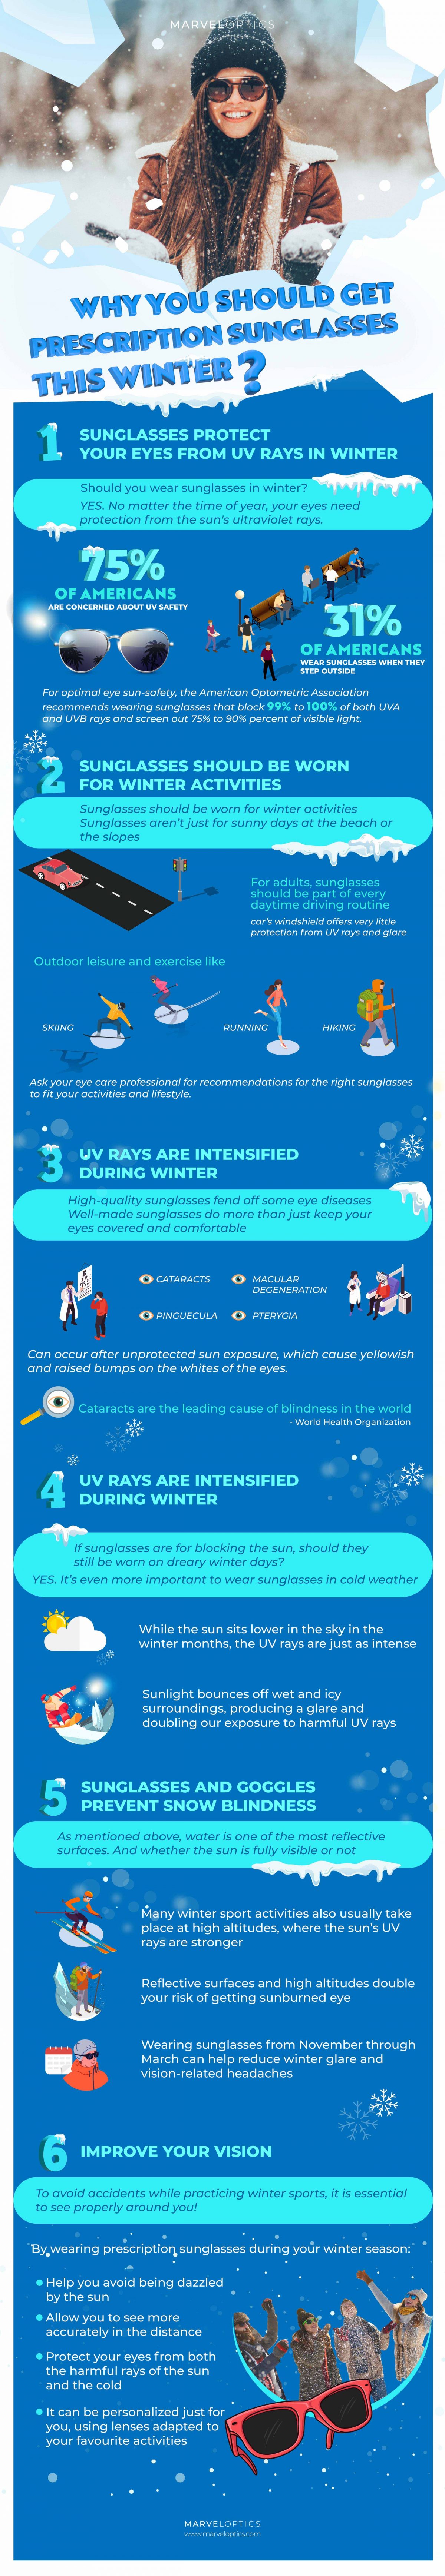 6 Reasons To Invest in Prescription Sunglasses This Winter Infographic